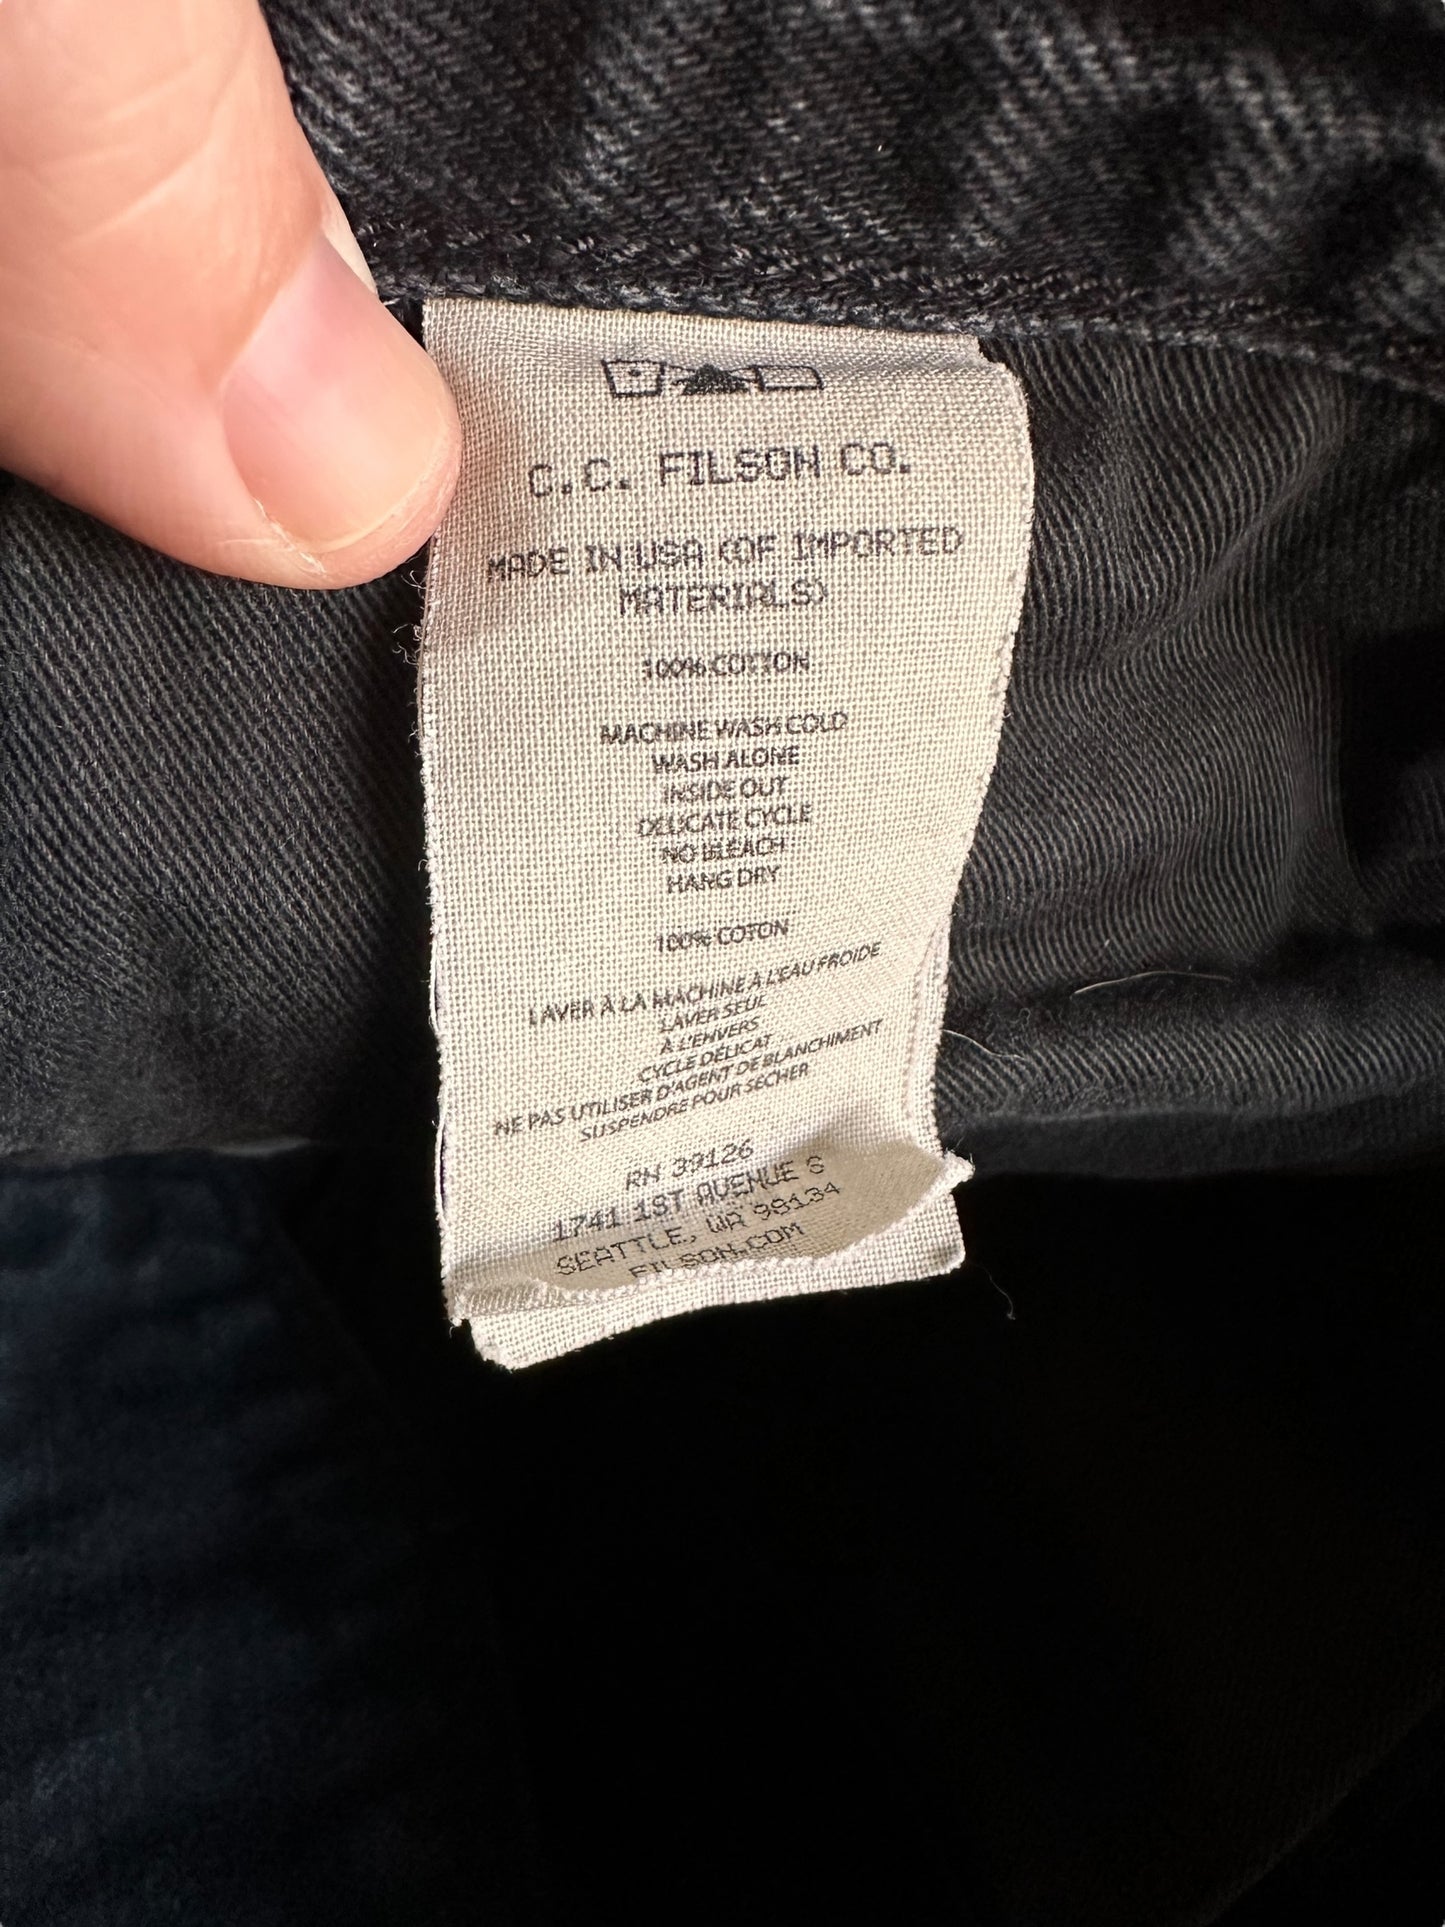 Production Tag on Black Filson Jeans W31 |  Filson Dungarees | Filson Workwear Seattle